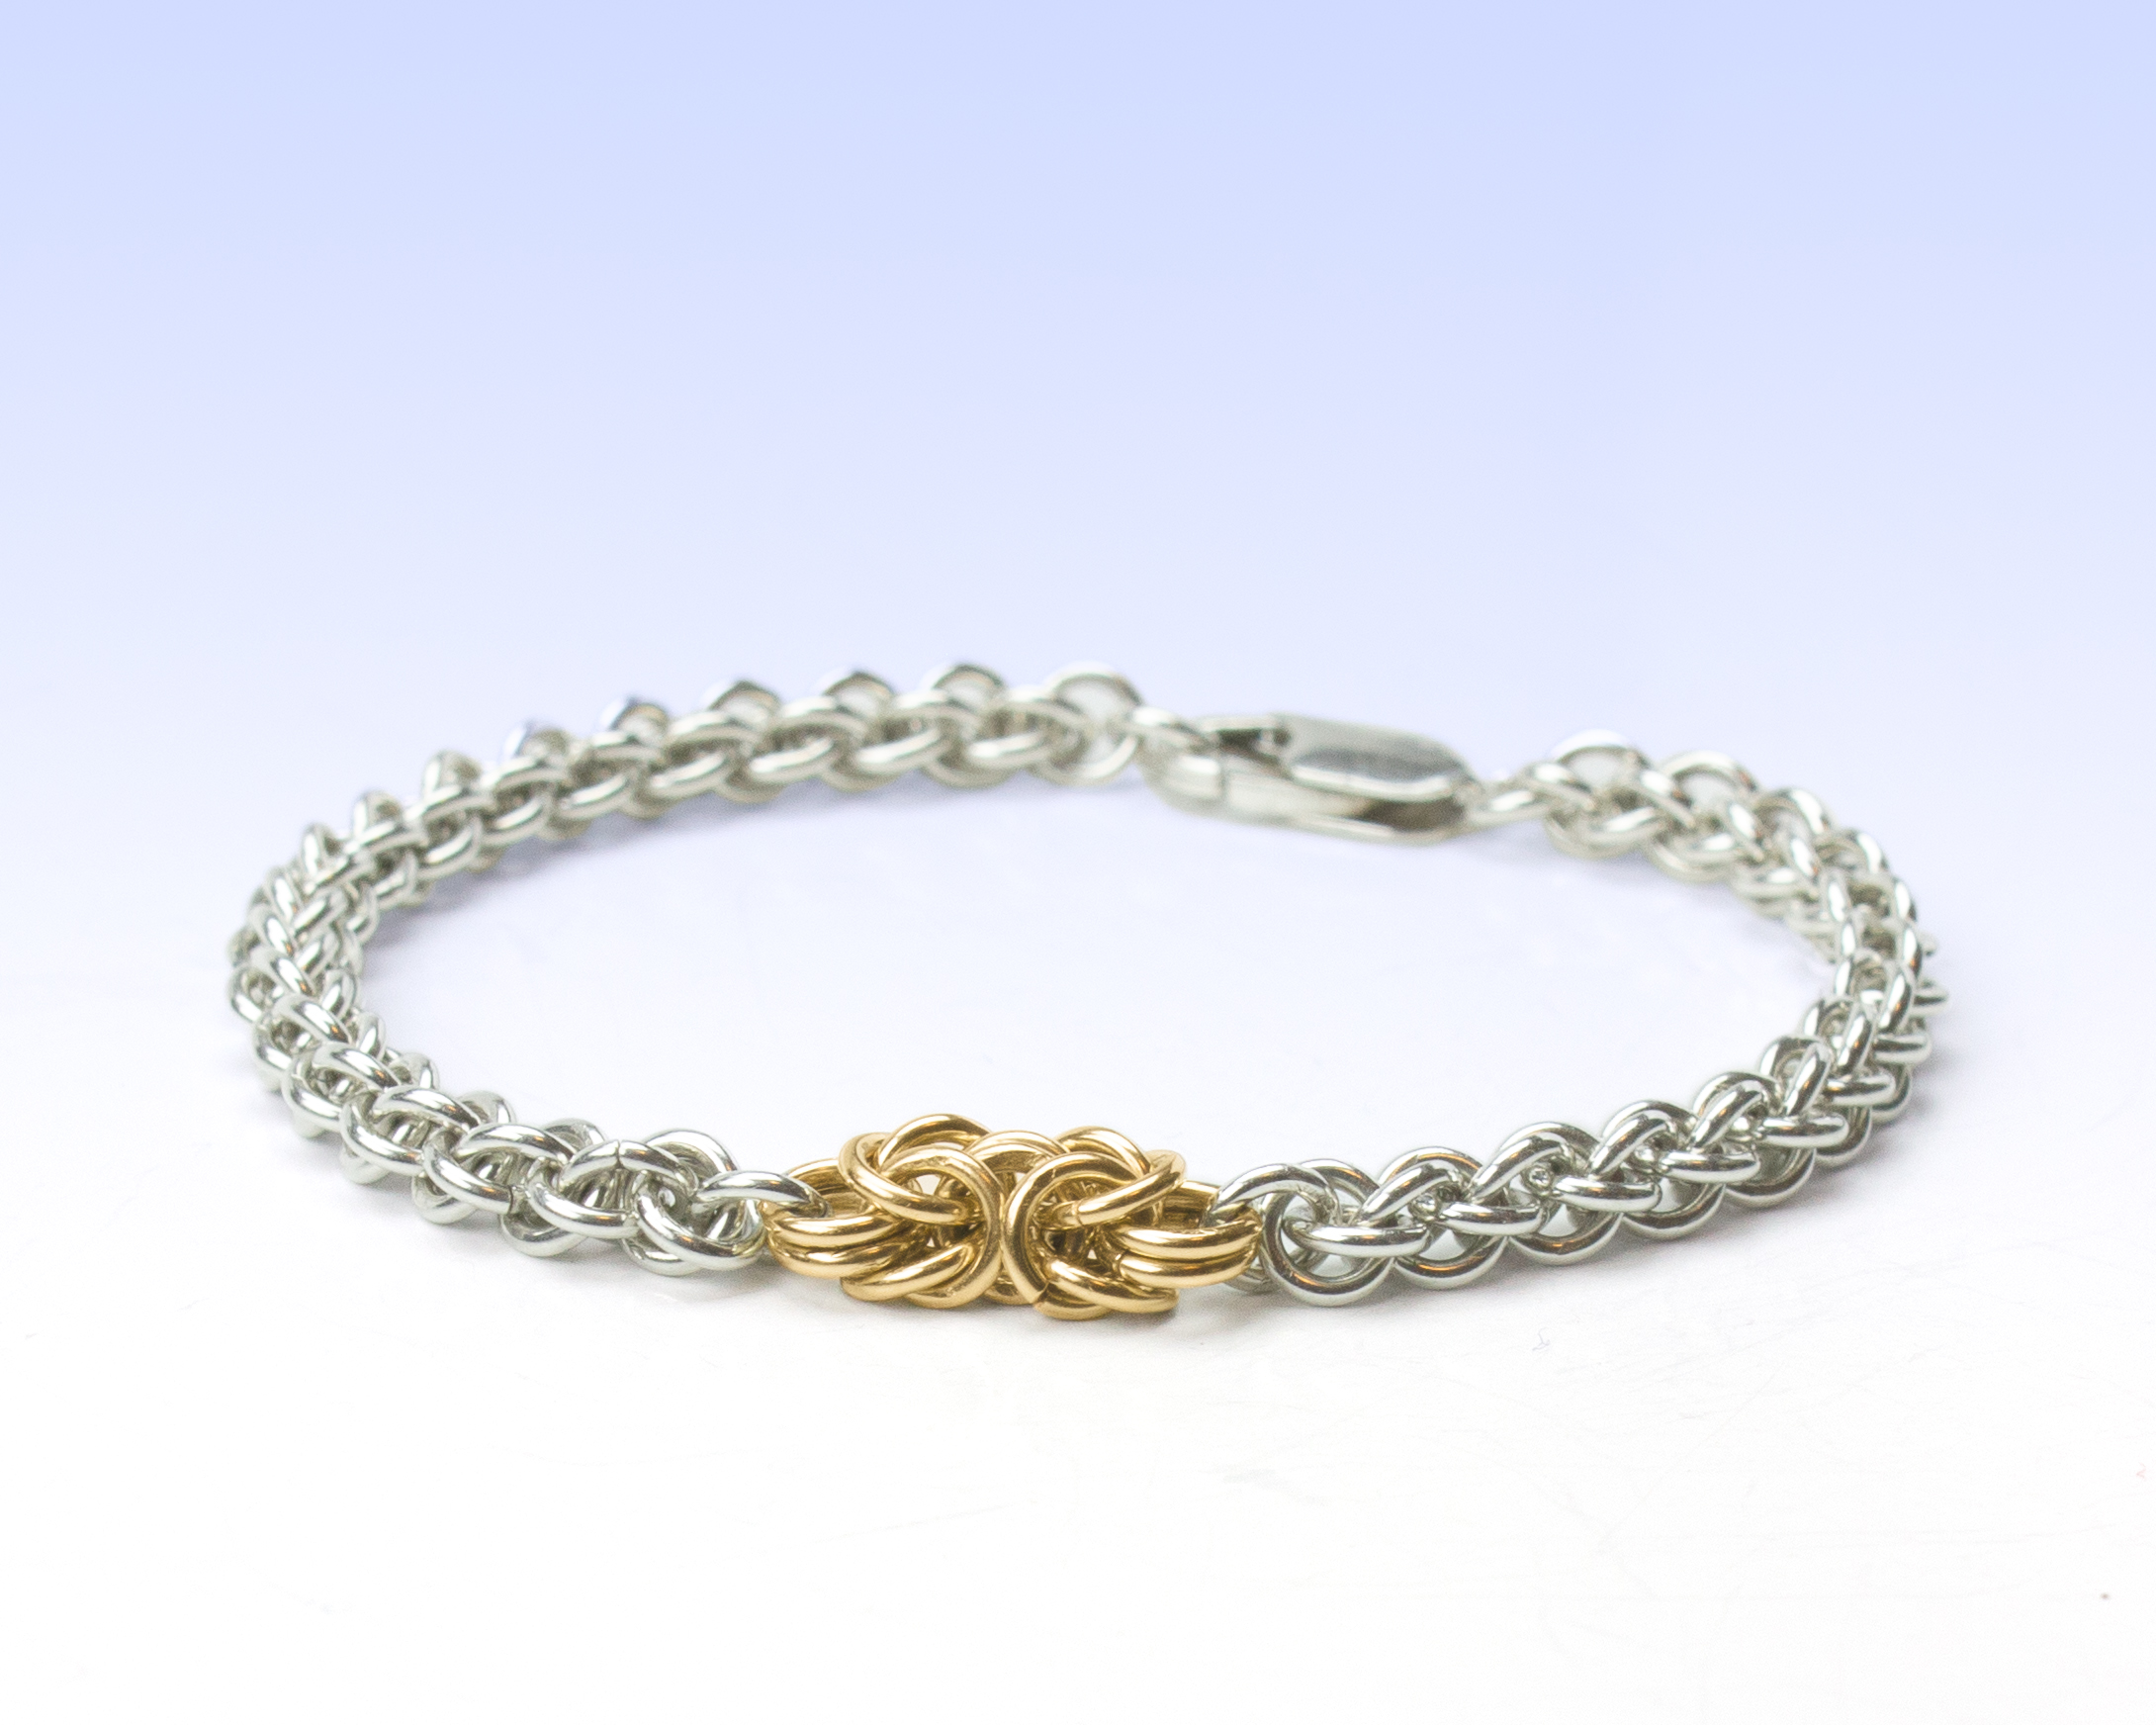 Silver chain bracelet with gold fill accent knot